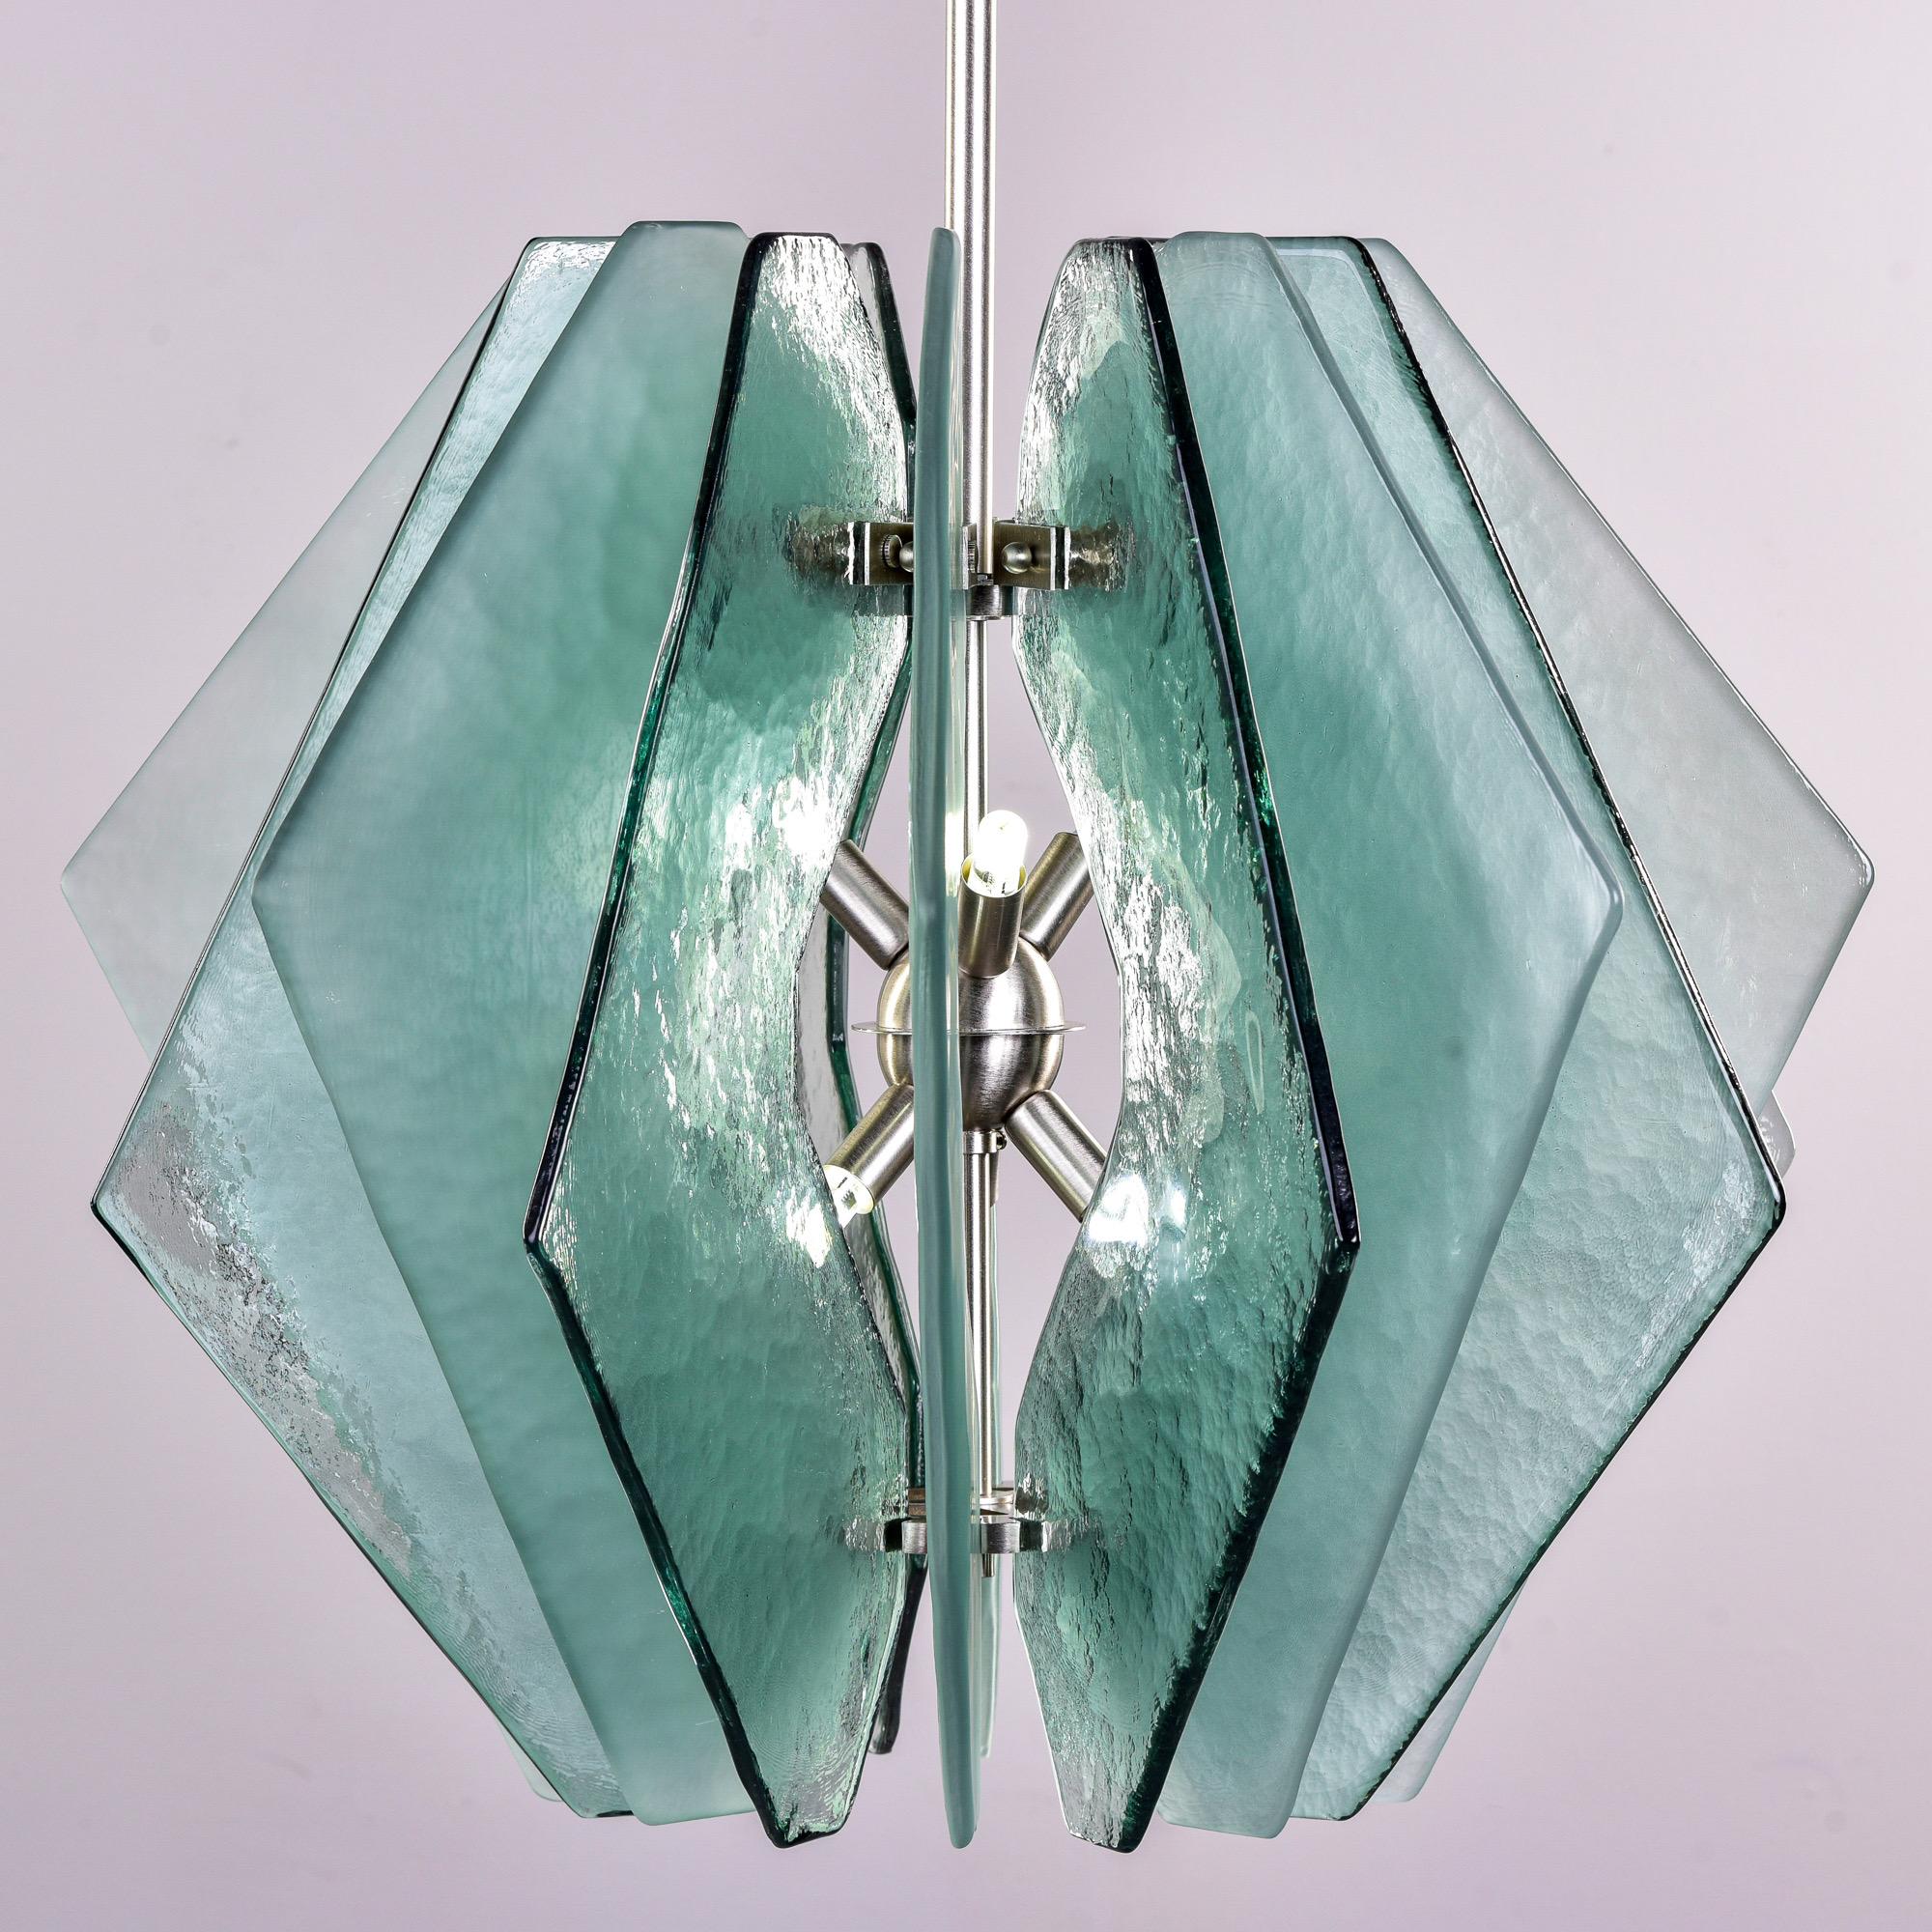 Murano Glass New Murano Chandelier with Glass Panels in Pale Green